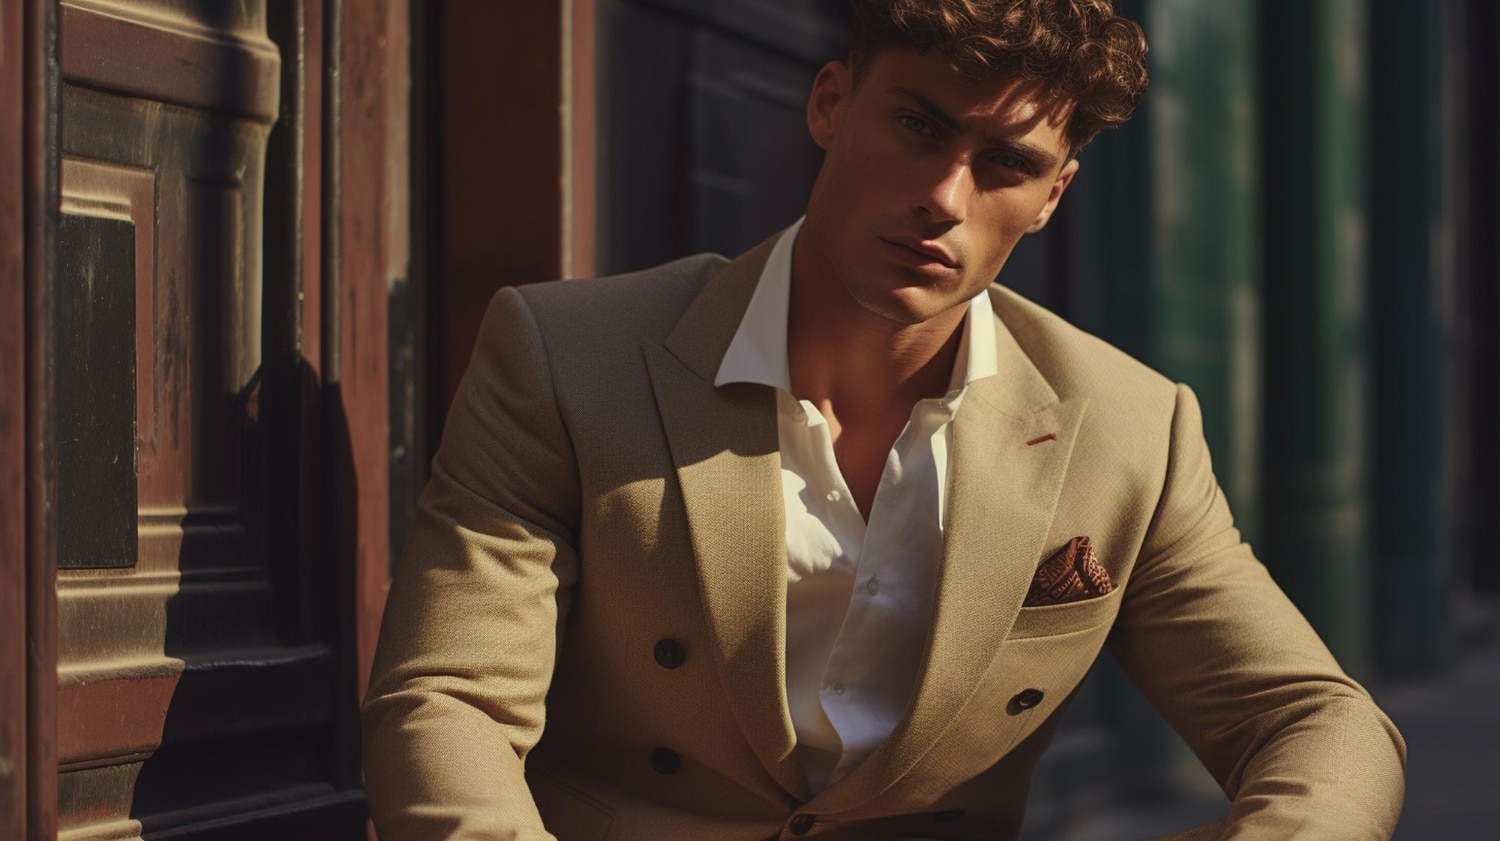 You are currently viewing Massimo Dutti Elegance in Everyday Wear